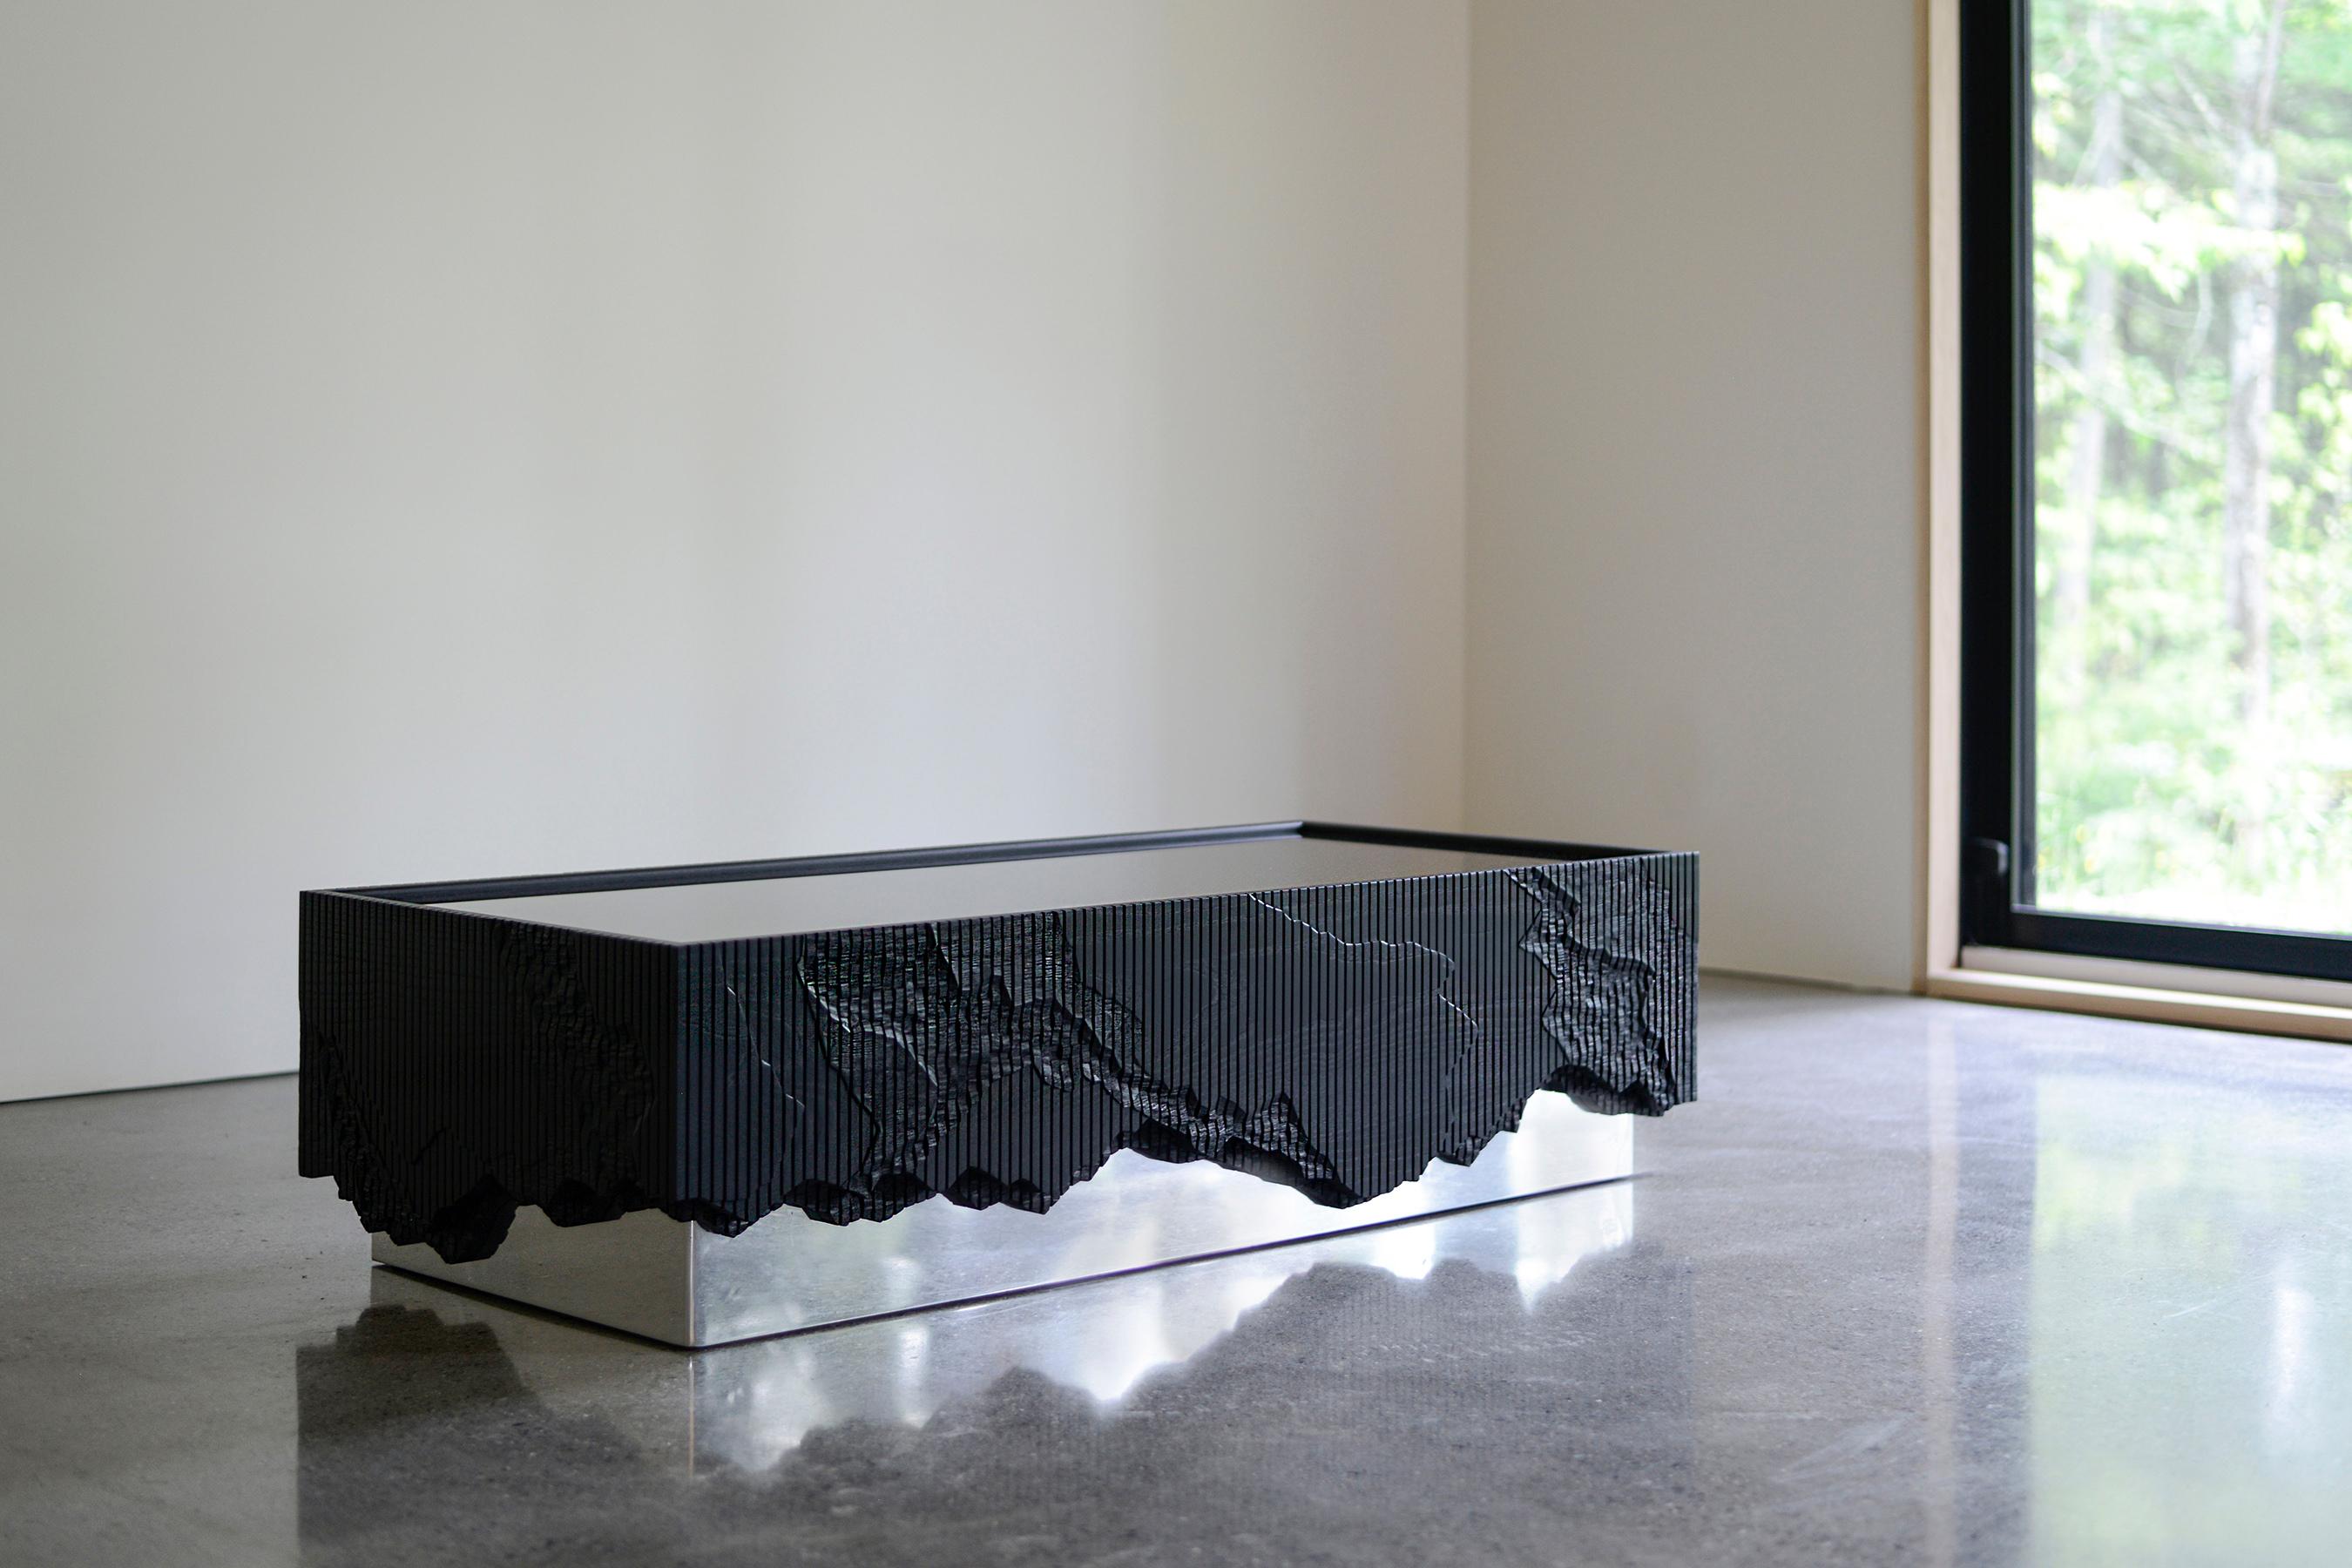 Ledge Coffee Table, is made of solid ash with a black glass top and a mirror polished base. It stems from material exploration inspired by cliffs around the studio, making solid ash reference crumbling stone through layered hand carving. 
The Shale